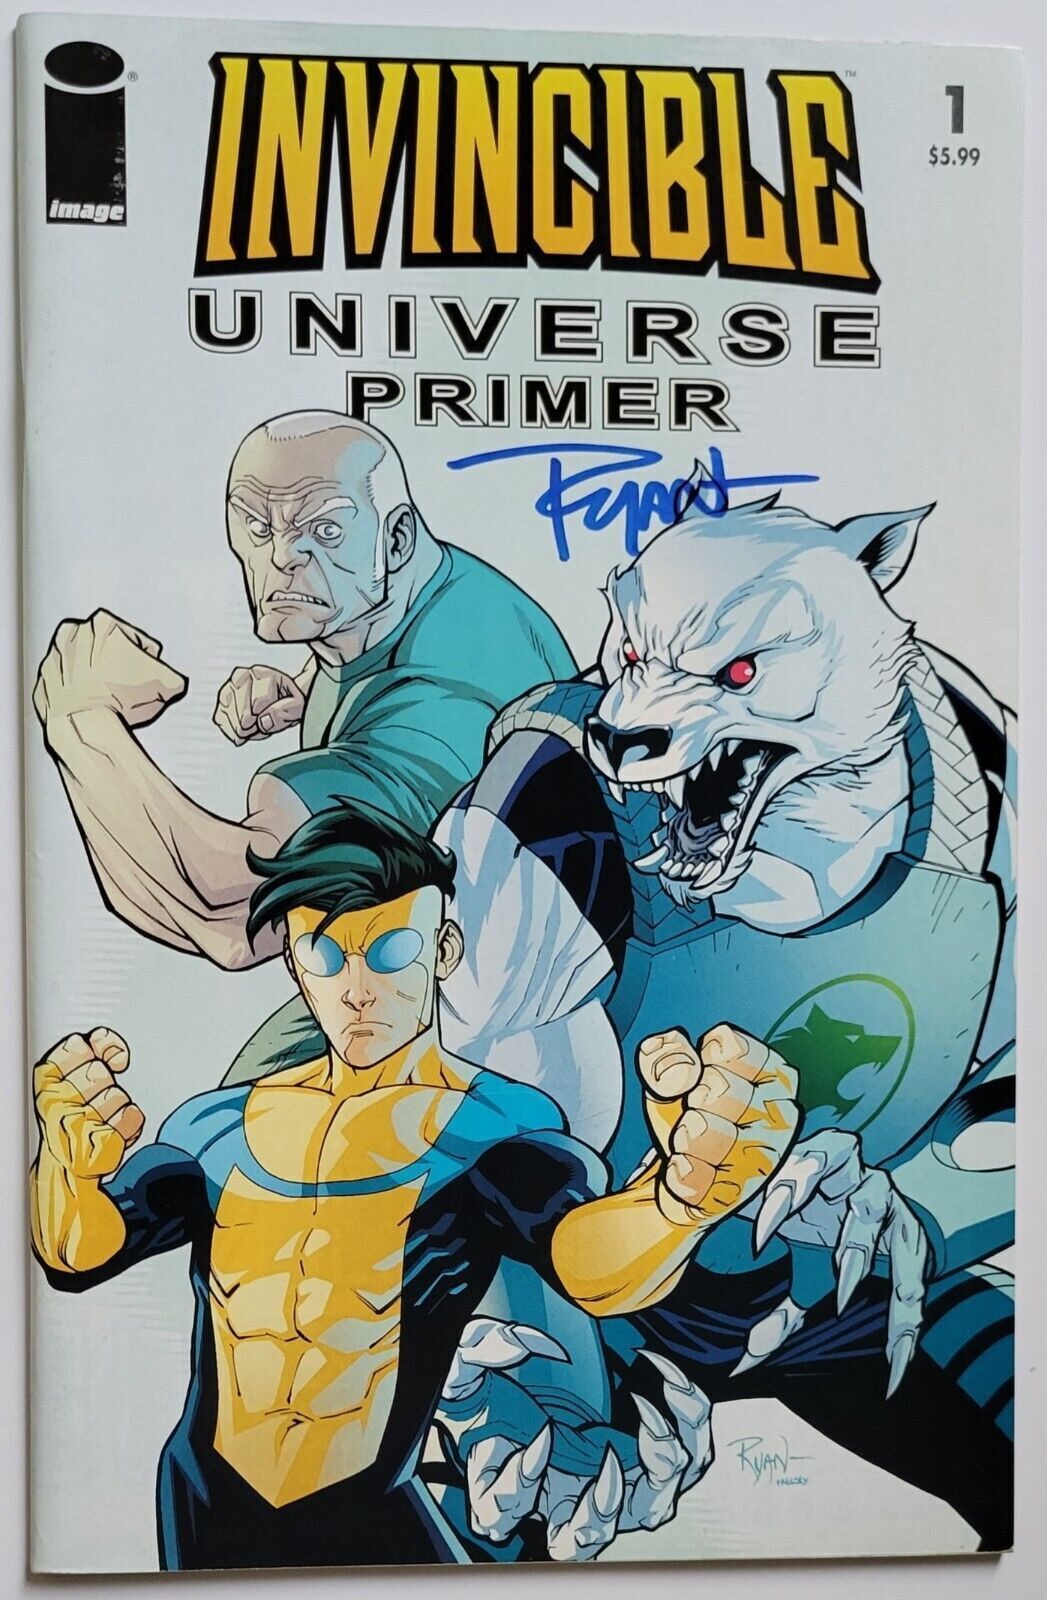 Invincible Image You Pick 0-144 BEST OFFER PLEASE MESSAGE OFFER AND TITLE #